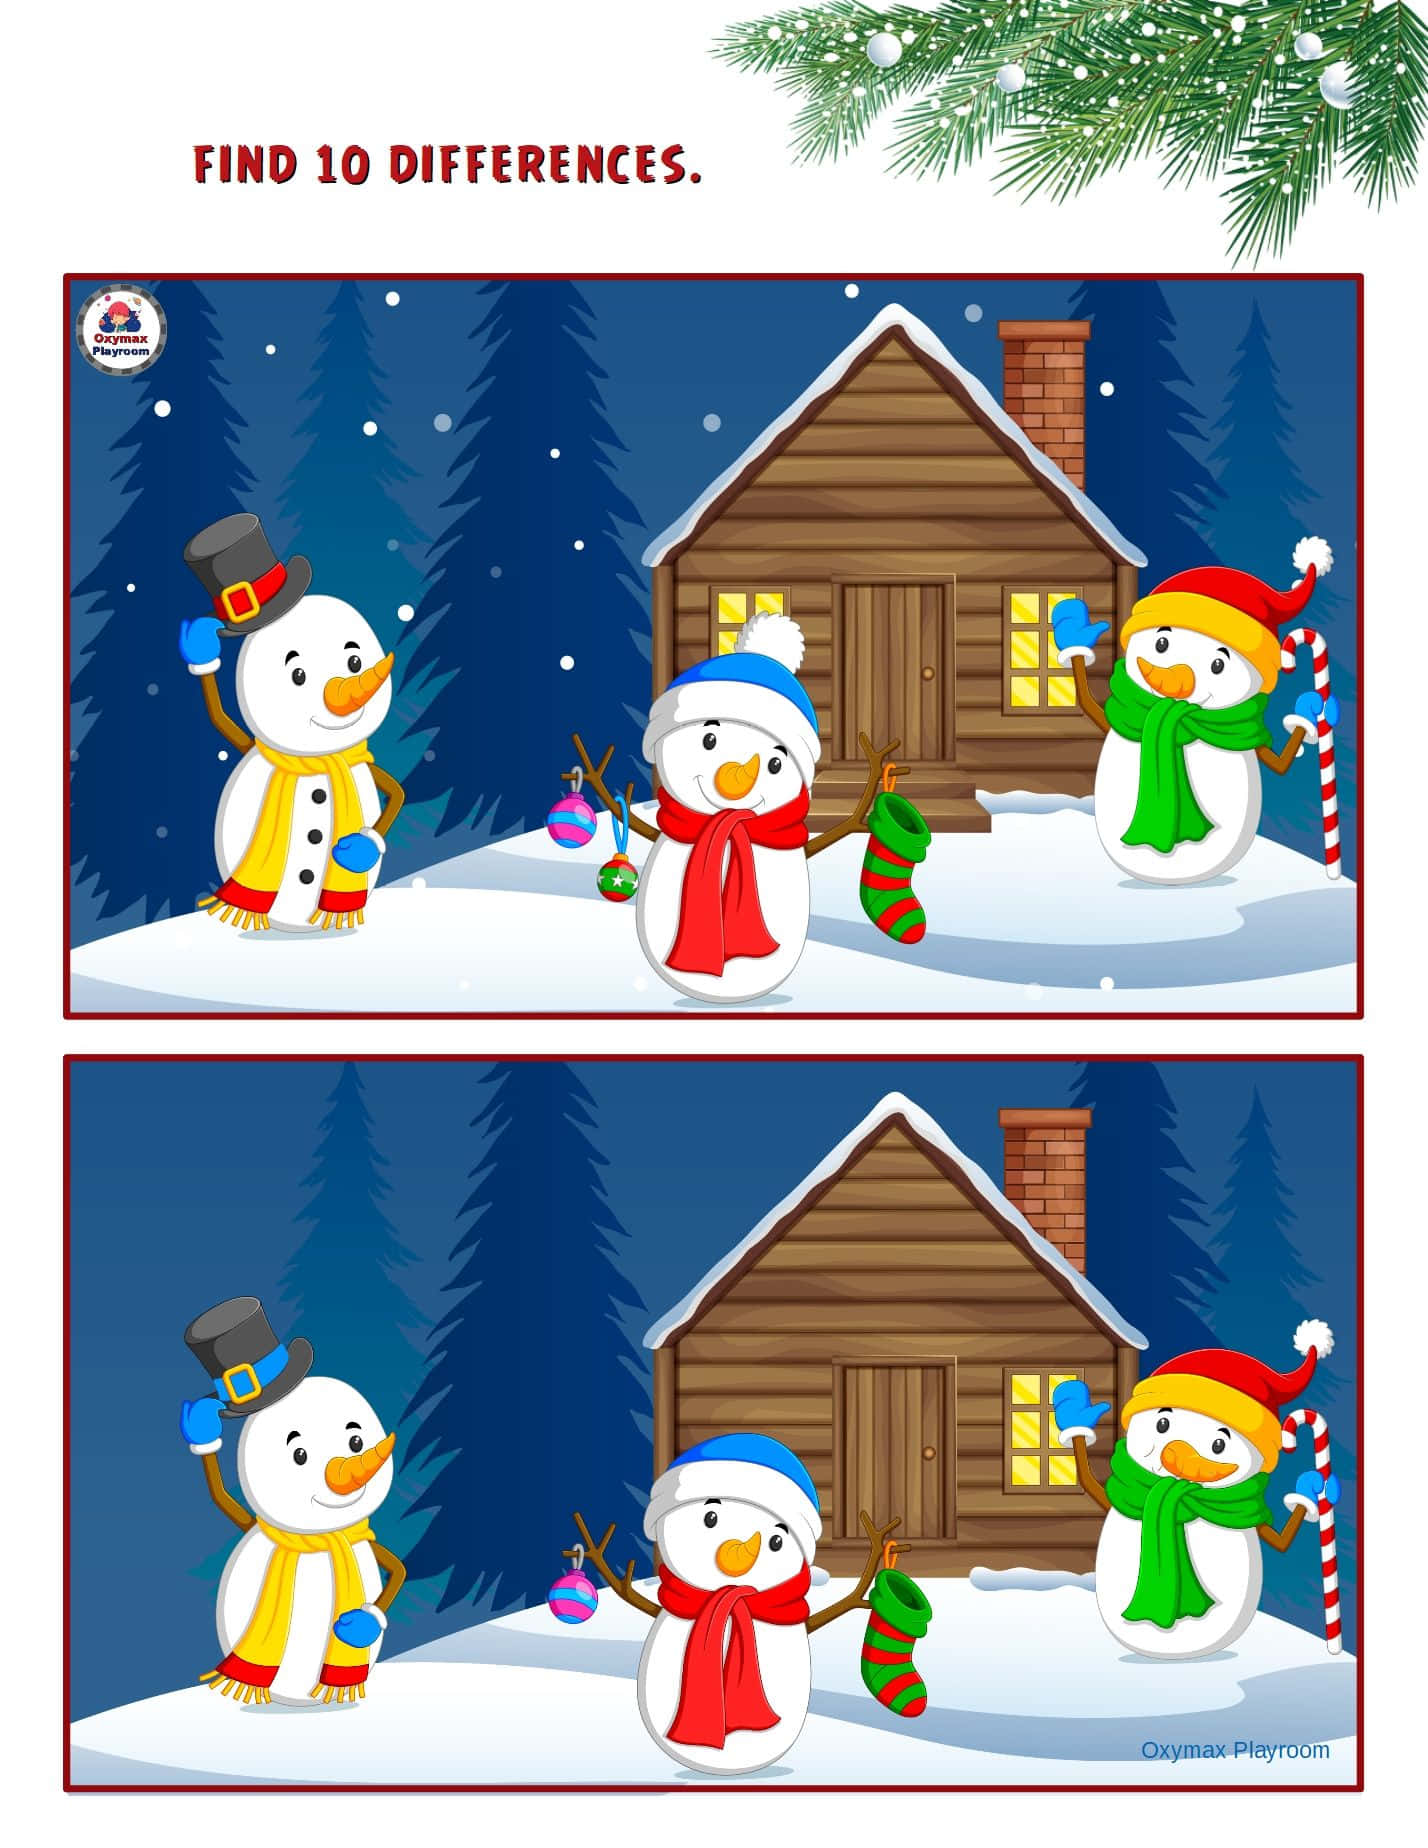 Christmas Snowman Find To Differences- Screenshot